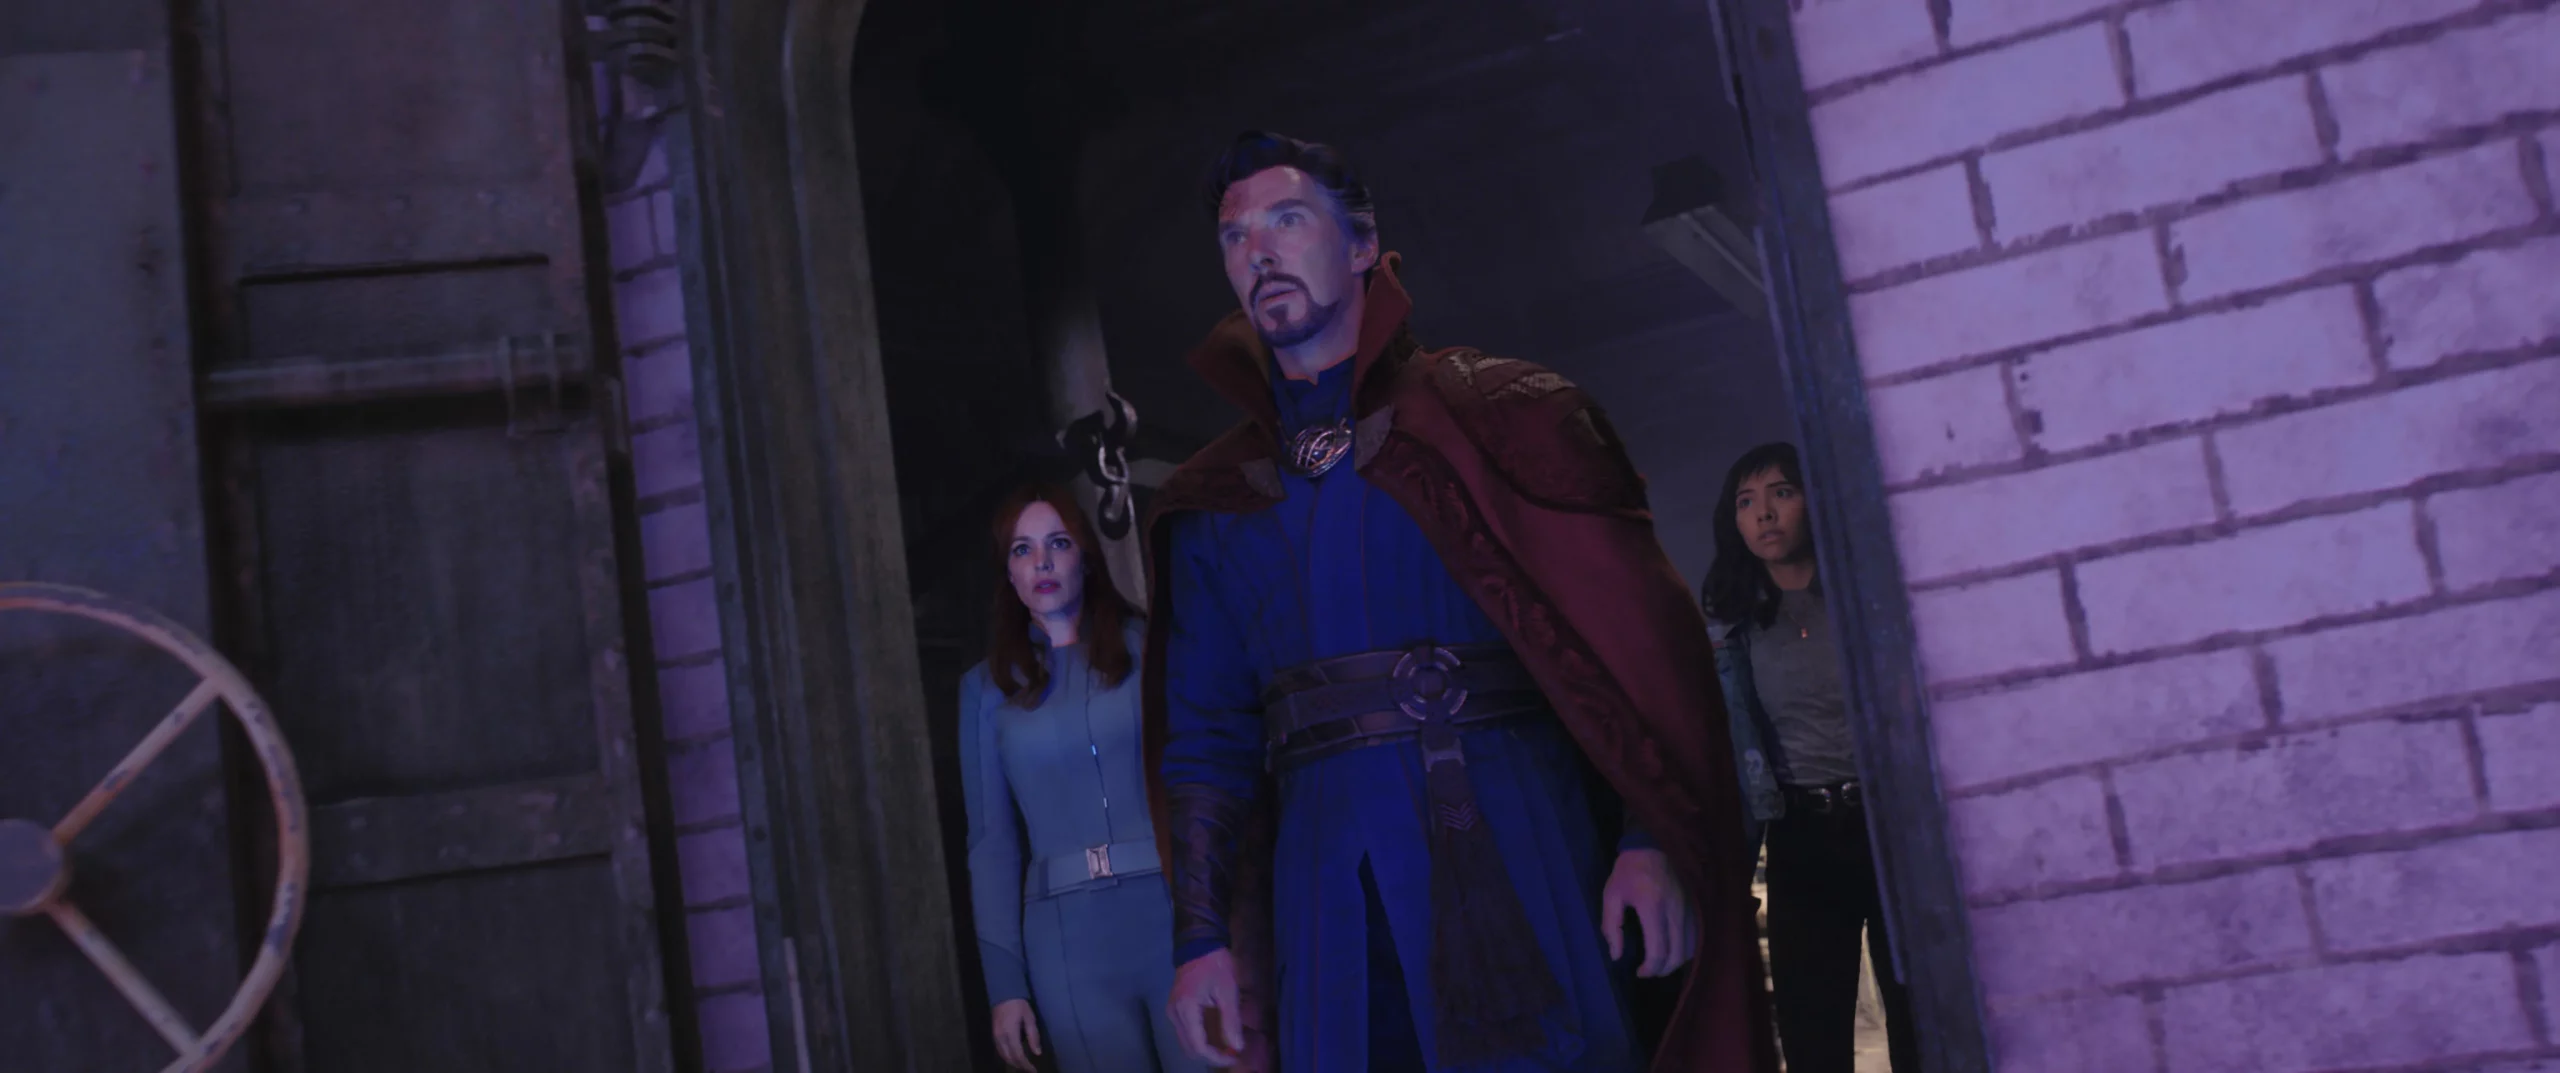 "Doctor Strange in the Multiverse of Madness" released a new set of stills